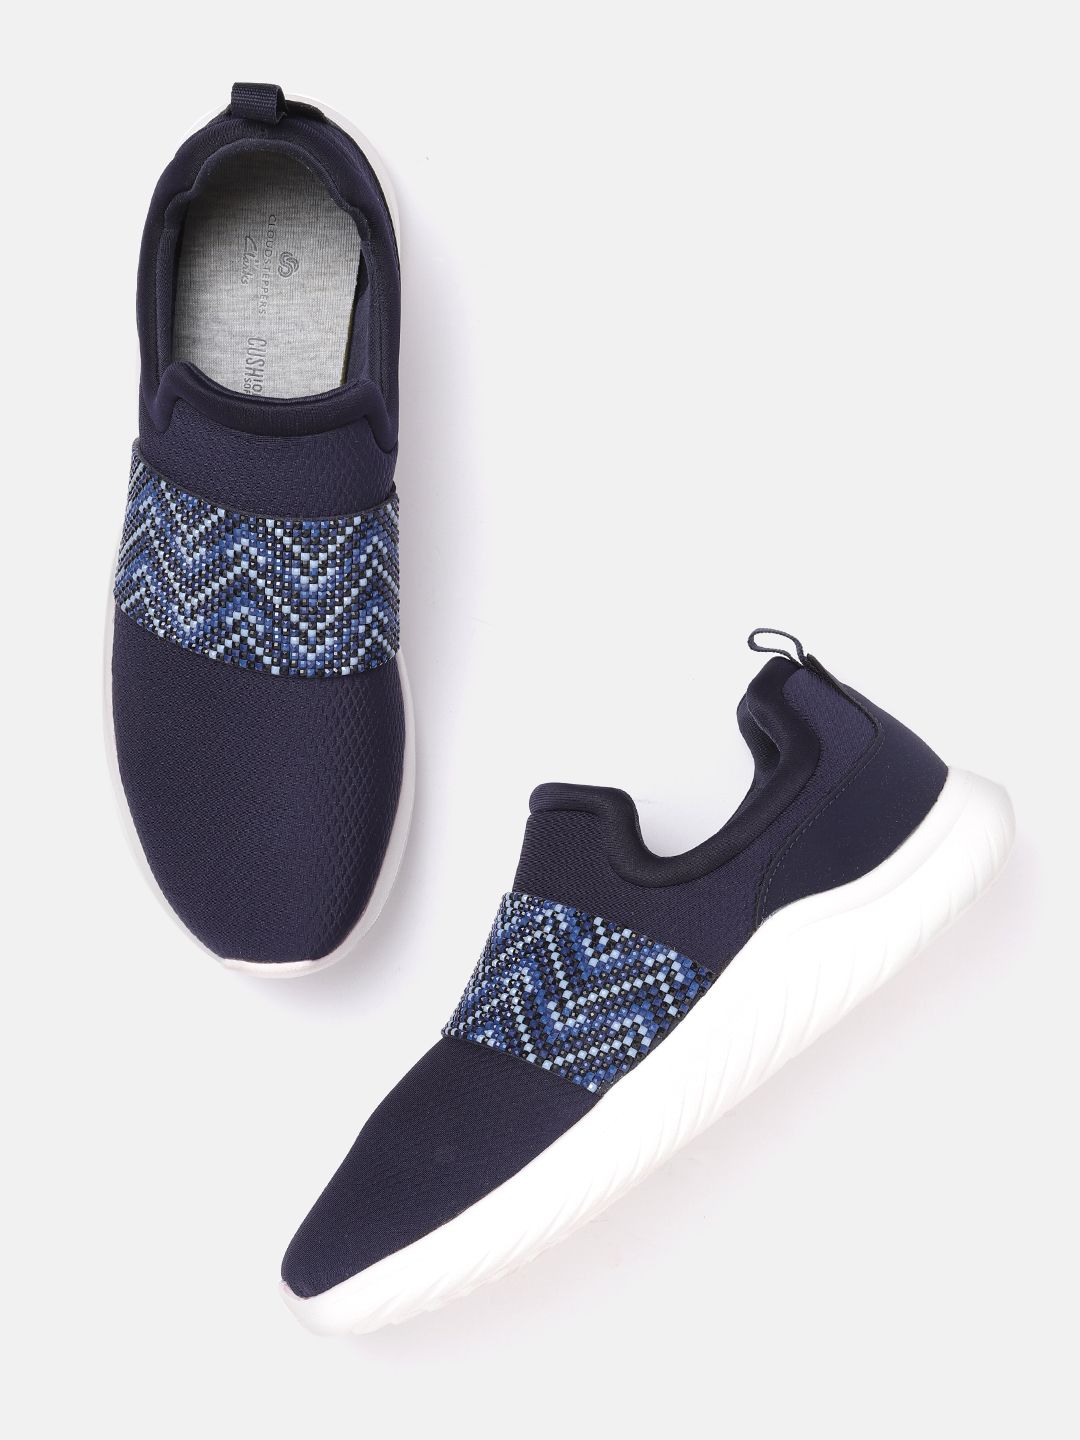 Clarks Women Navy Blue & White Striped Beads Studded Slip-On Sneakers Price in India